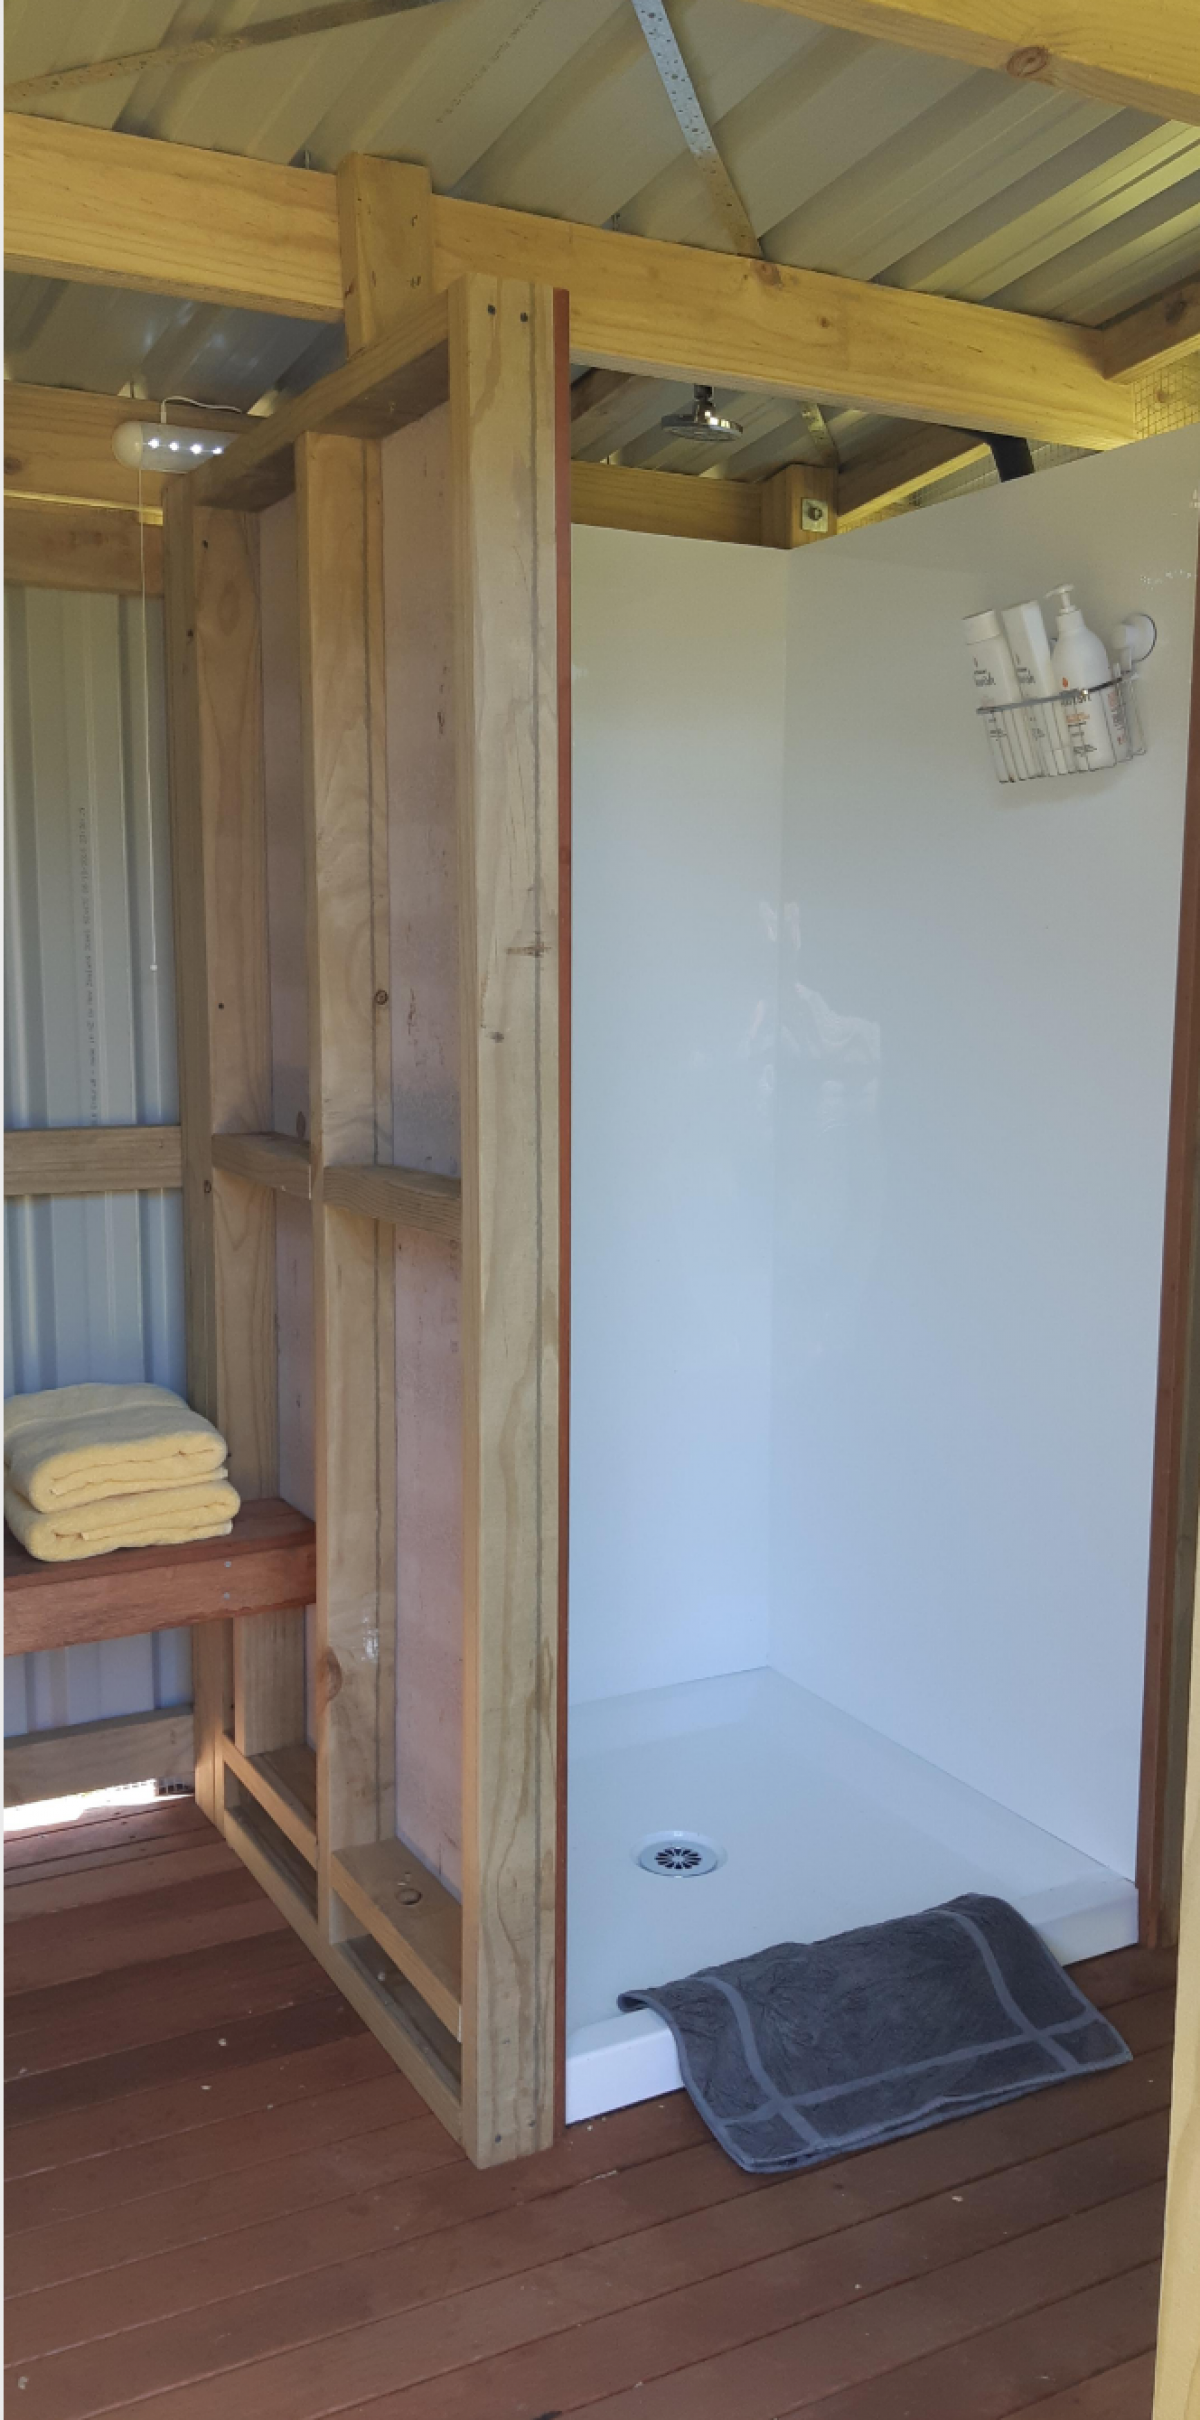 Photo of property: Nice hot shower and dressing room